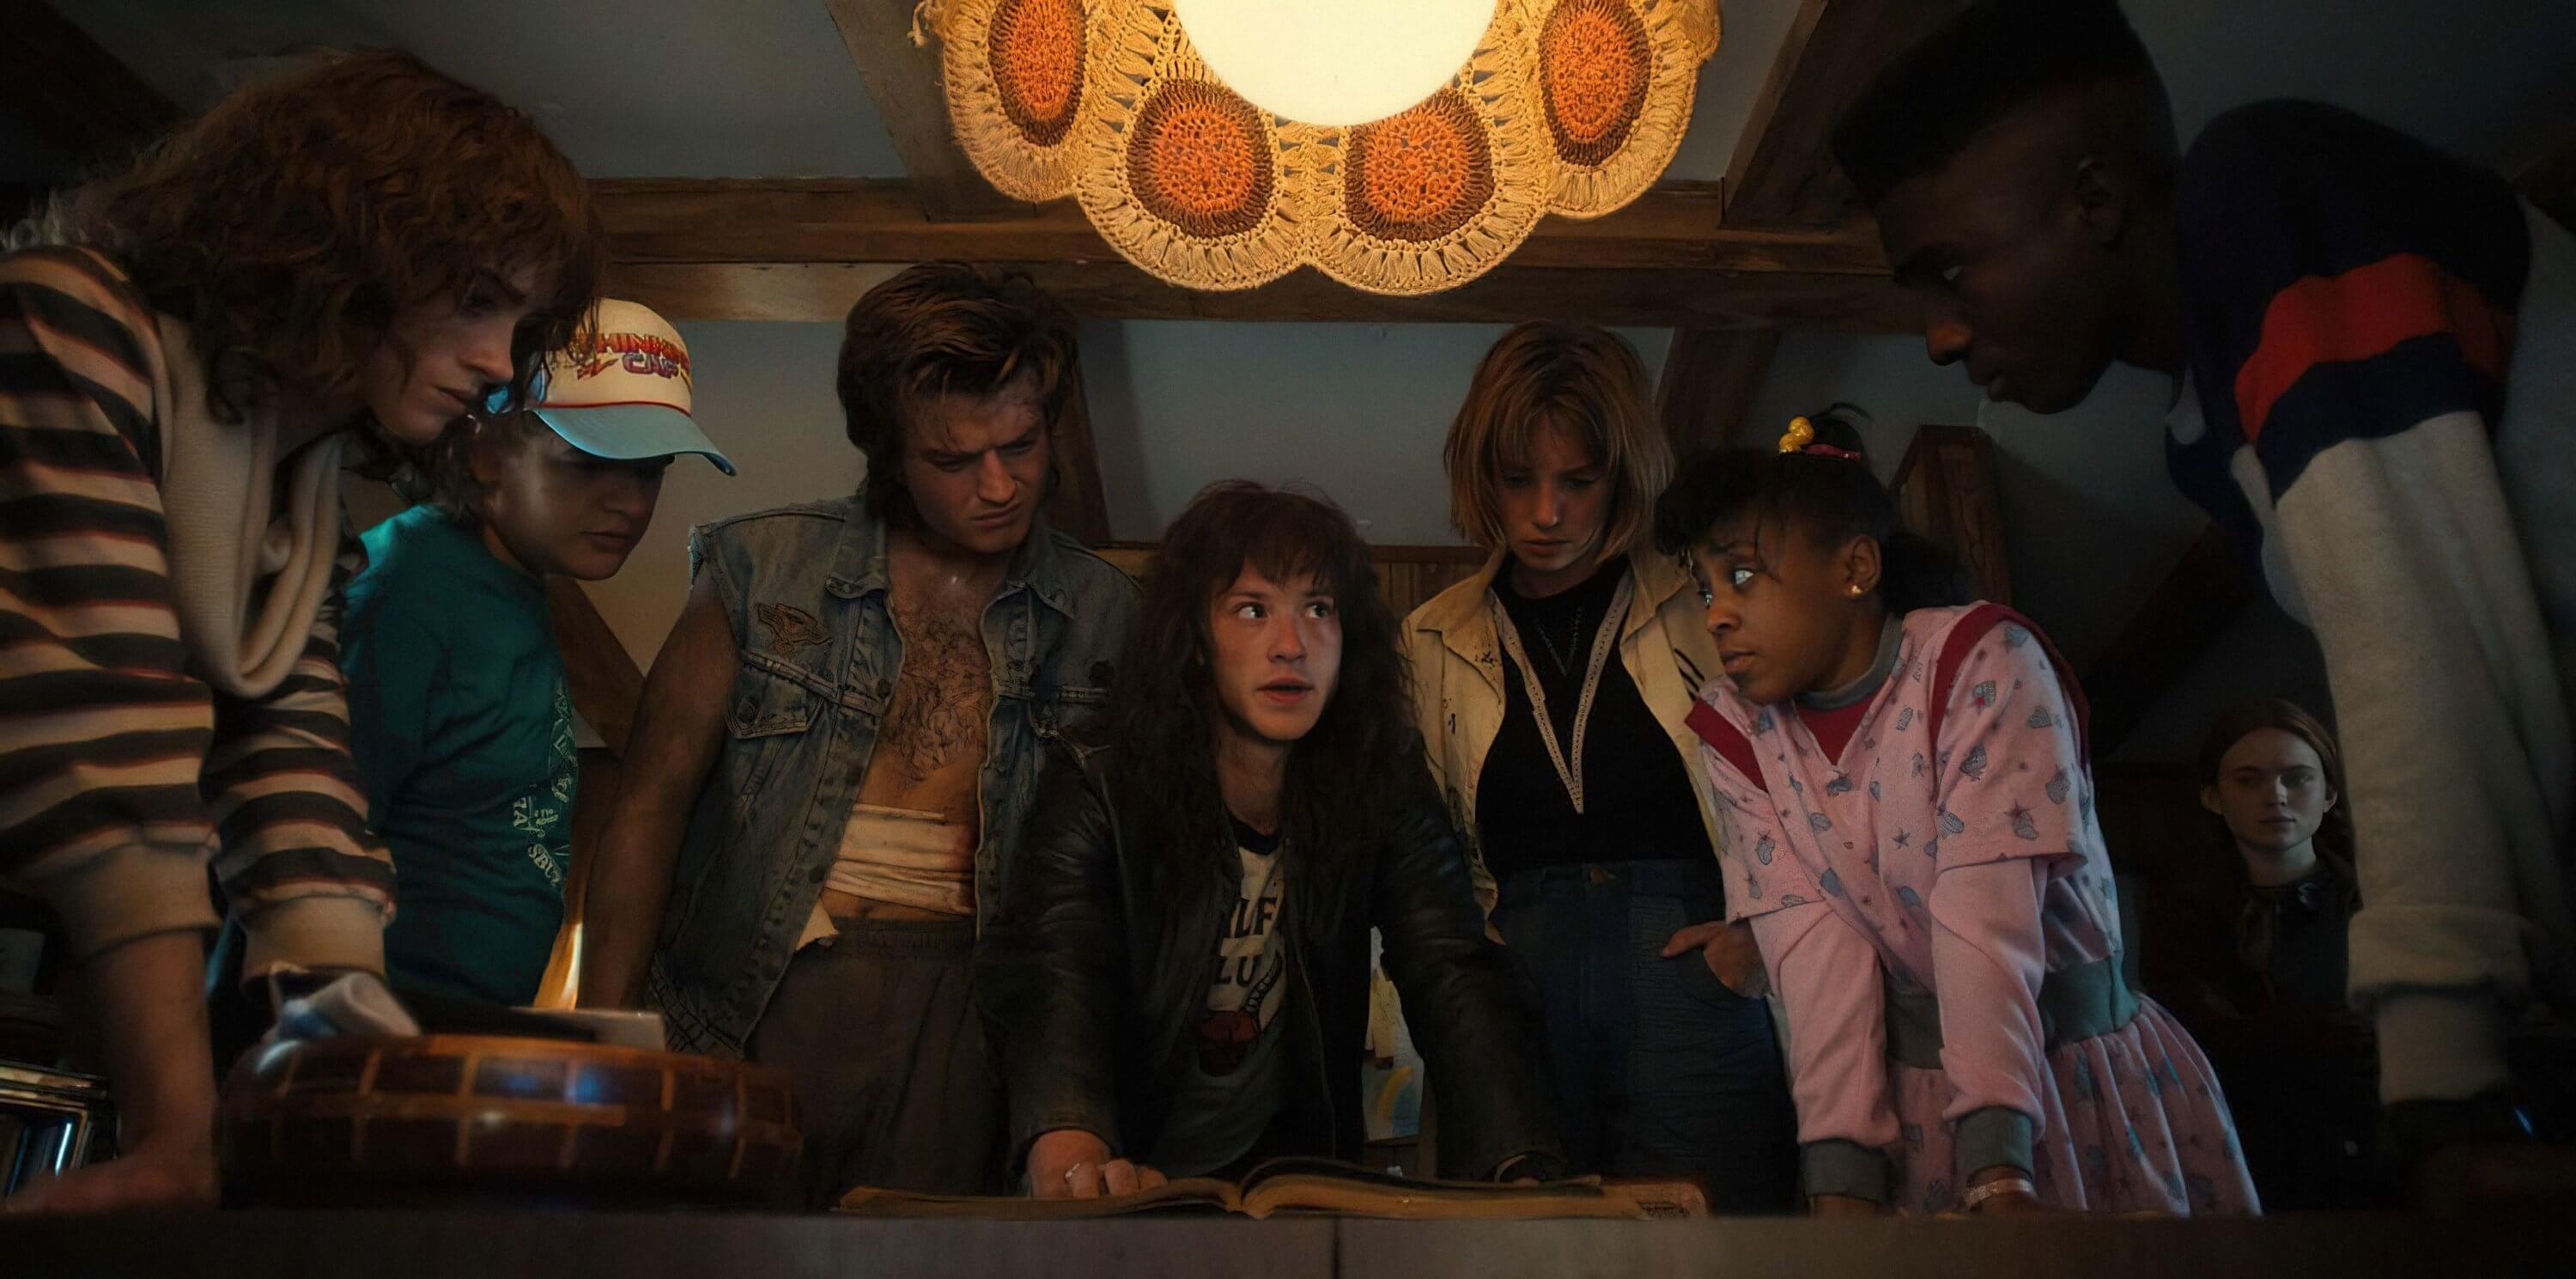 Stranger Things spin-off plans discussed, still from season 4 volume 1 of cast